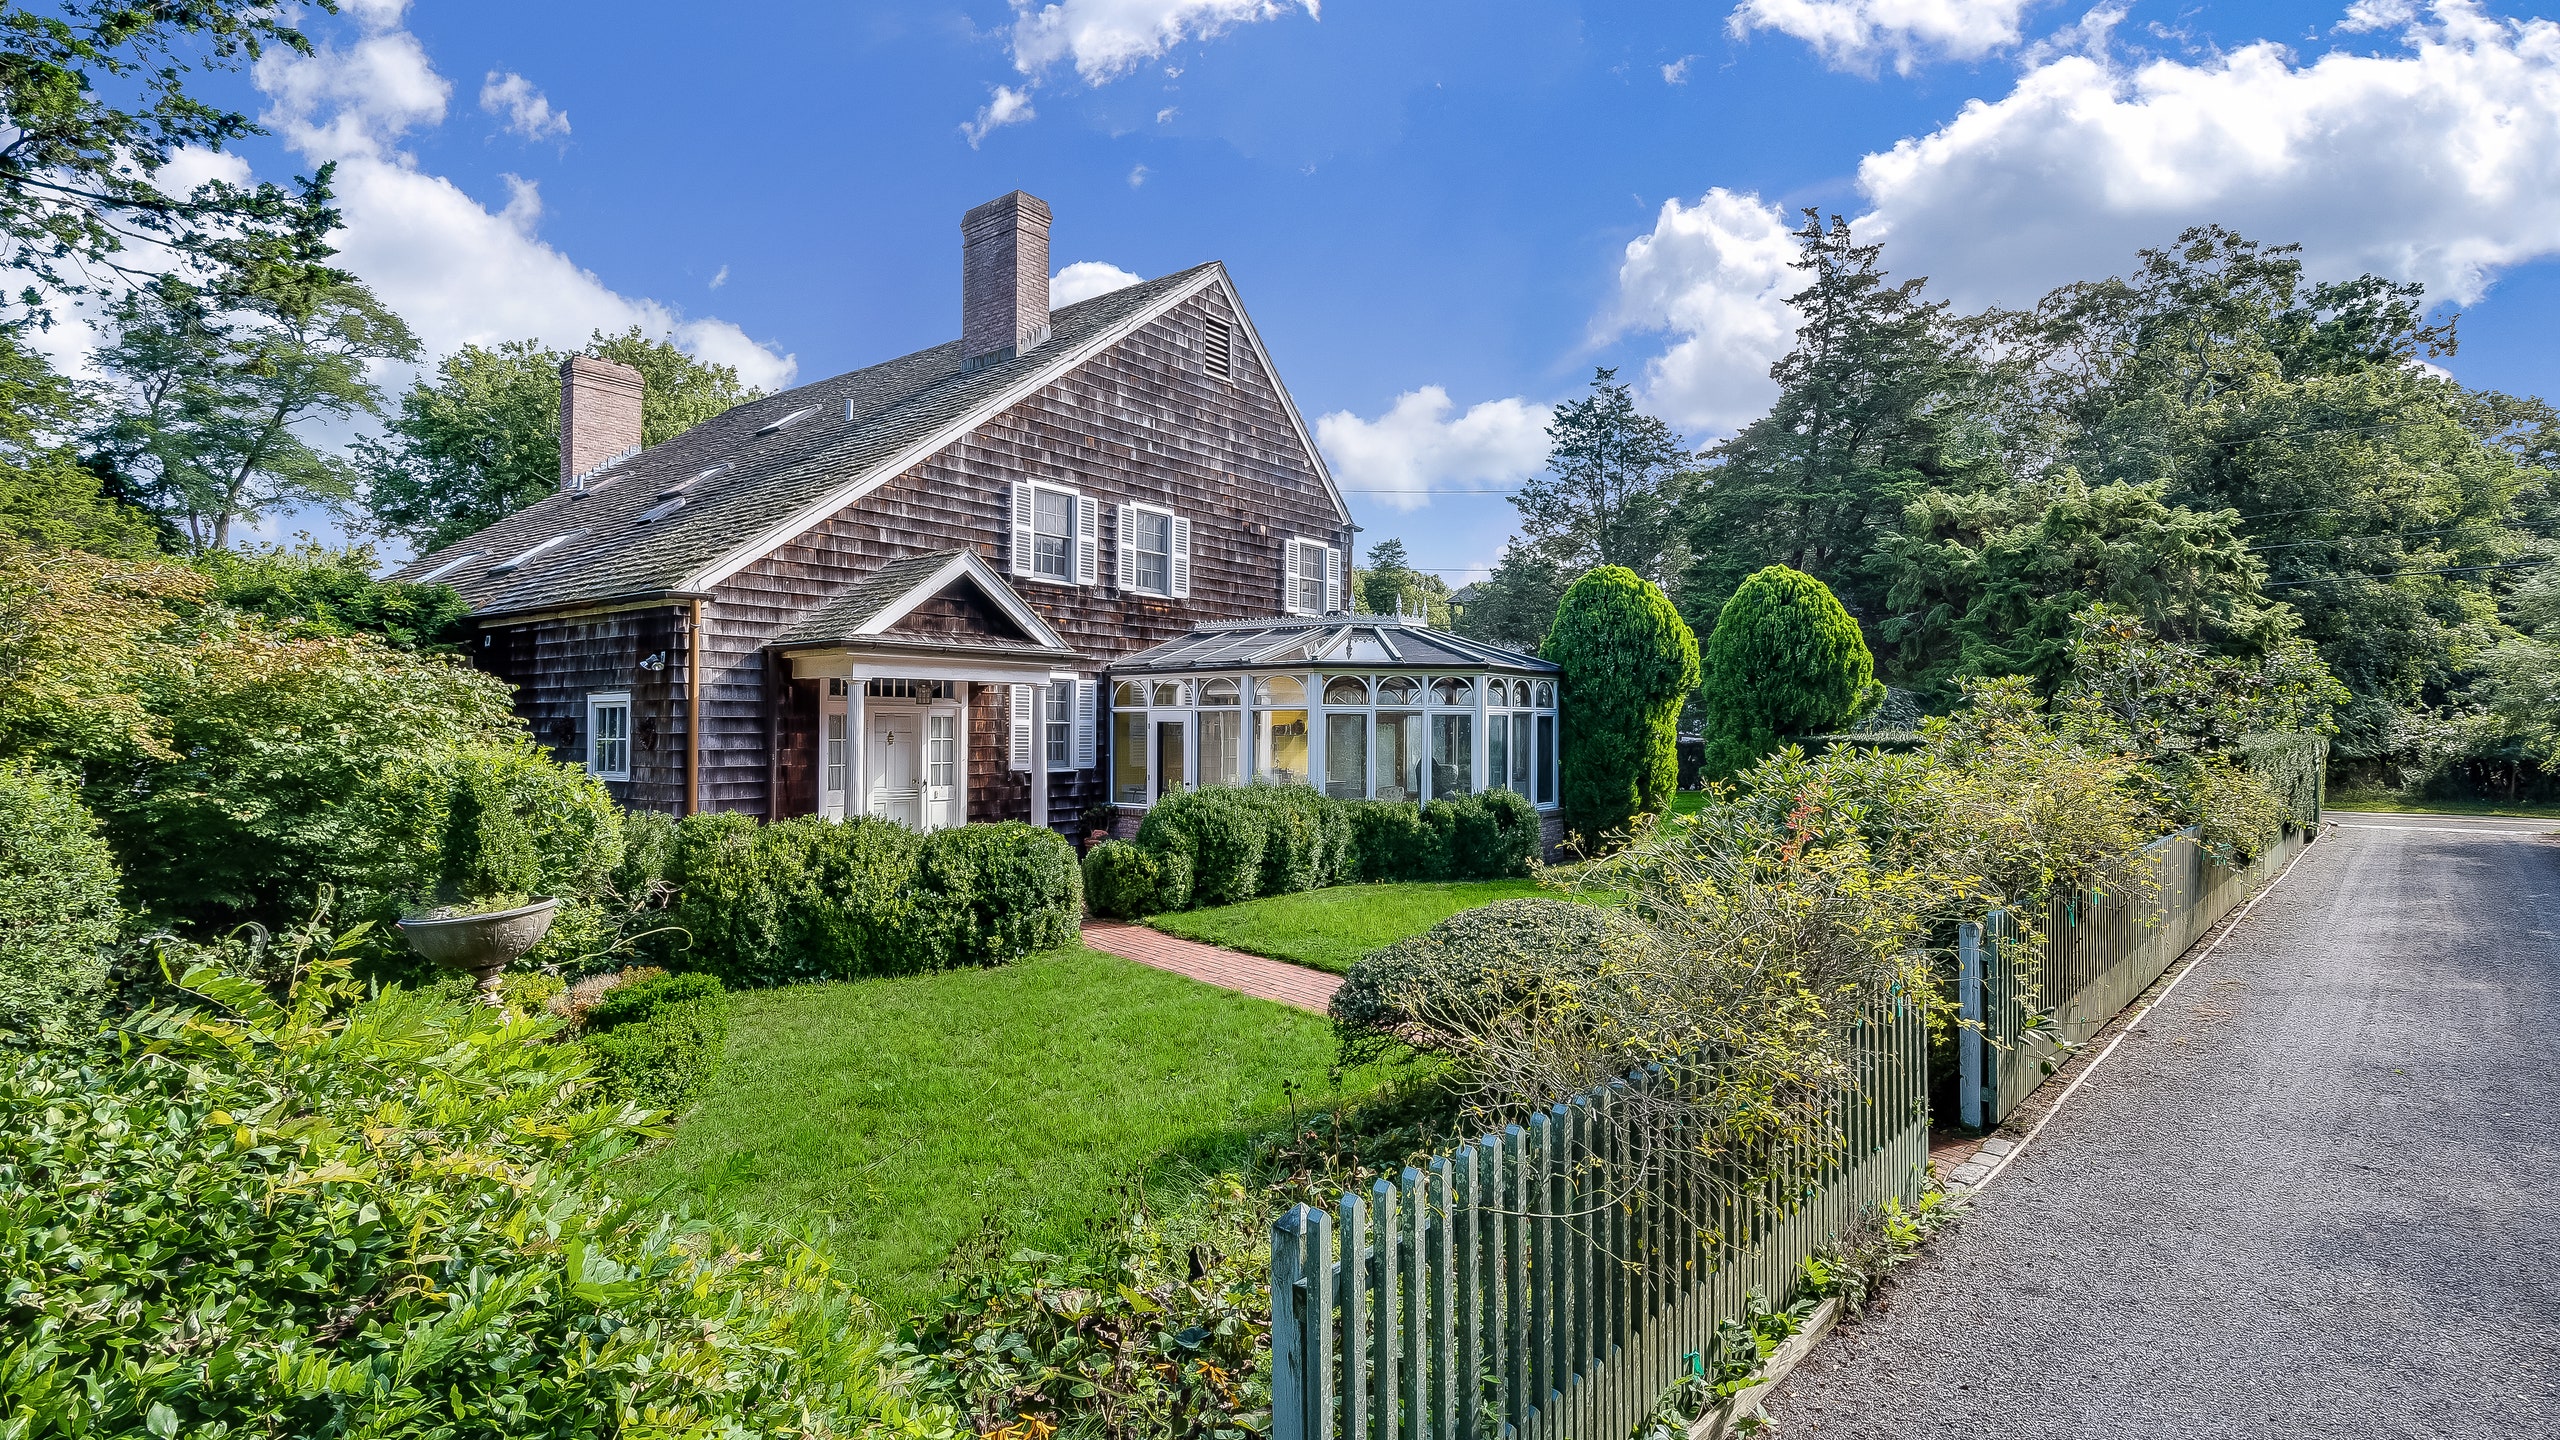 Judith leibers east hampton home listed for million architectural digest